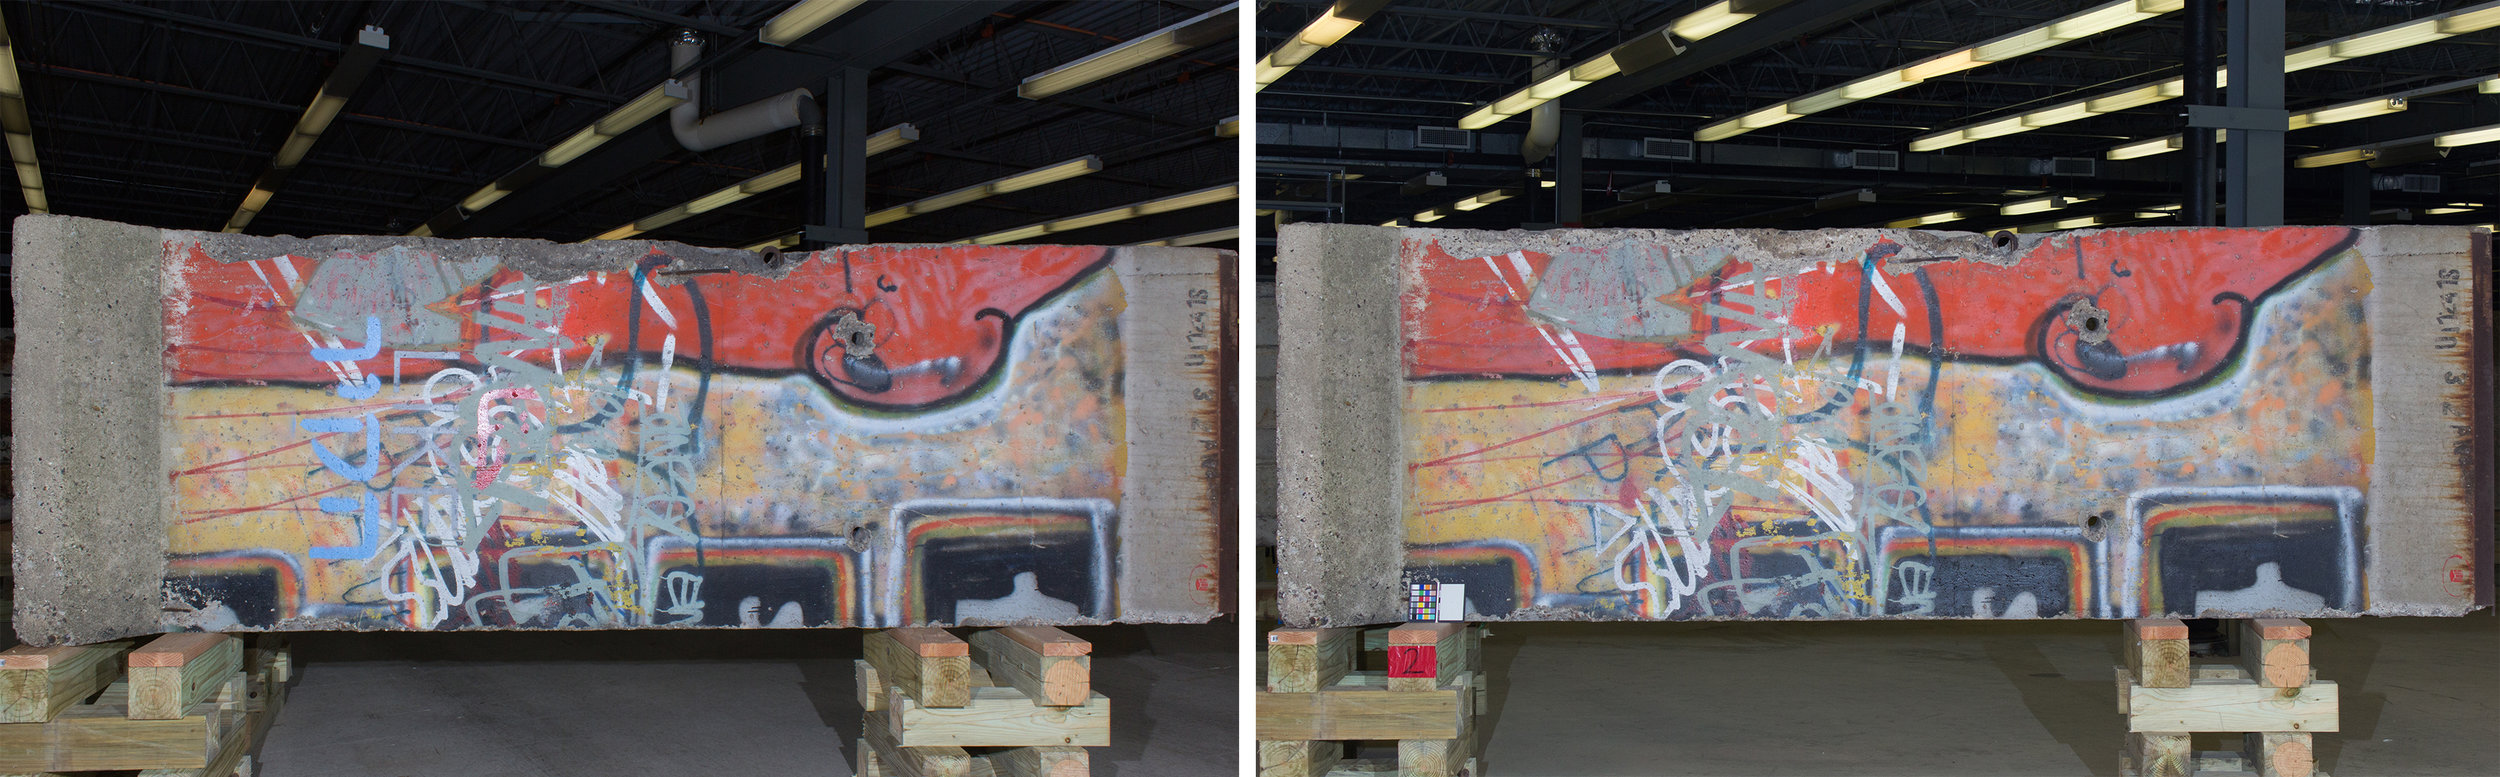  Segment 95.&nbsp;Before (left) and After conservation treatment (right).  Image © Katey Corda, 2015 